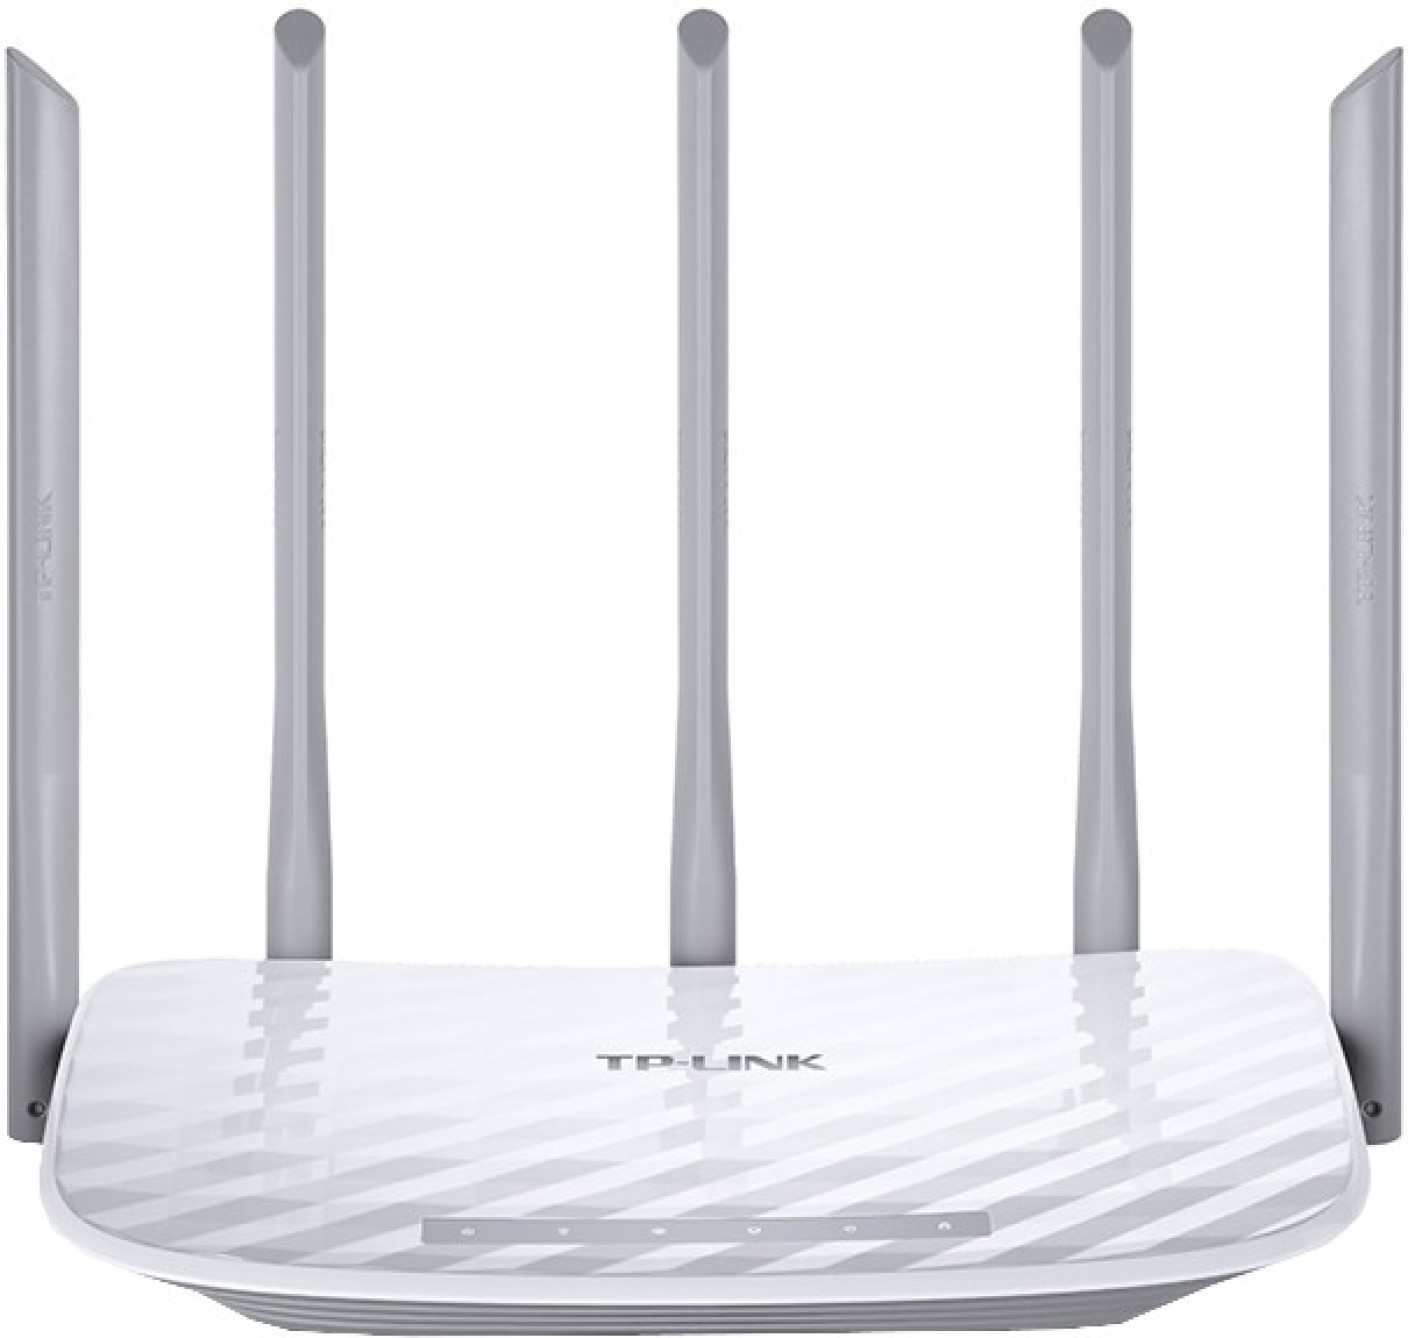  TP Link Archer C60 AC1350 Wireless Dual Band Router TP 